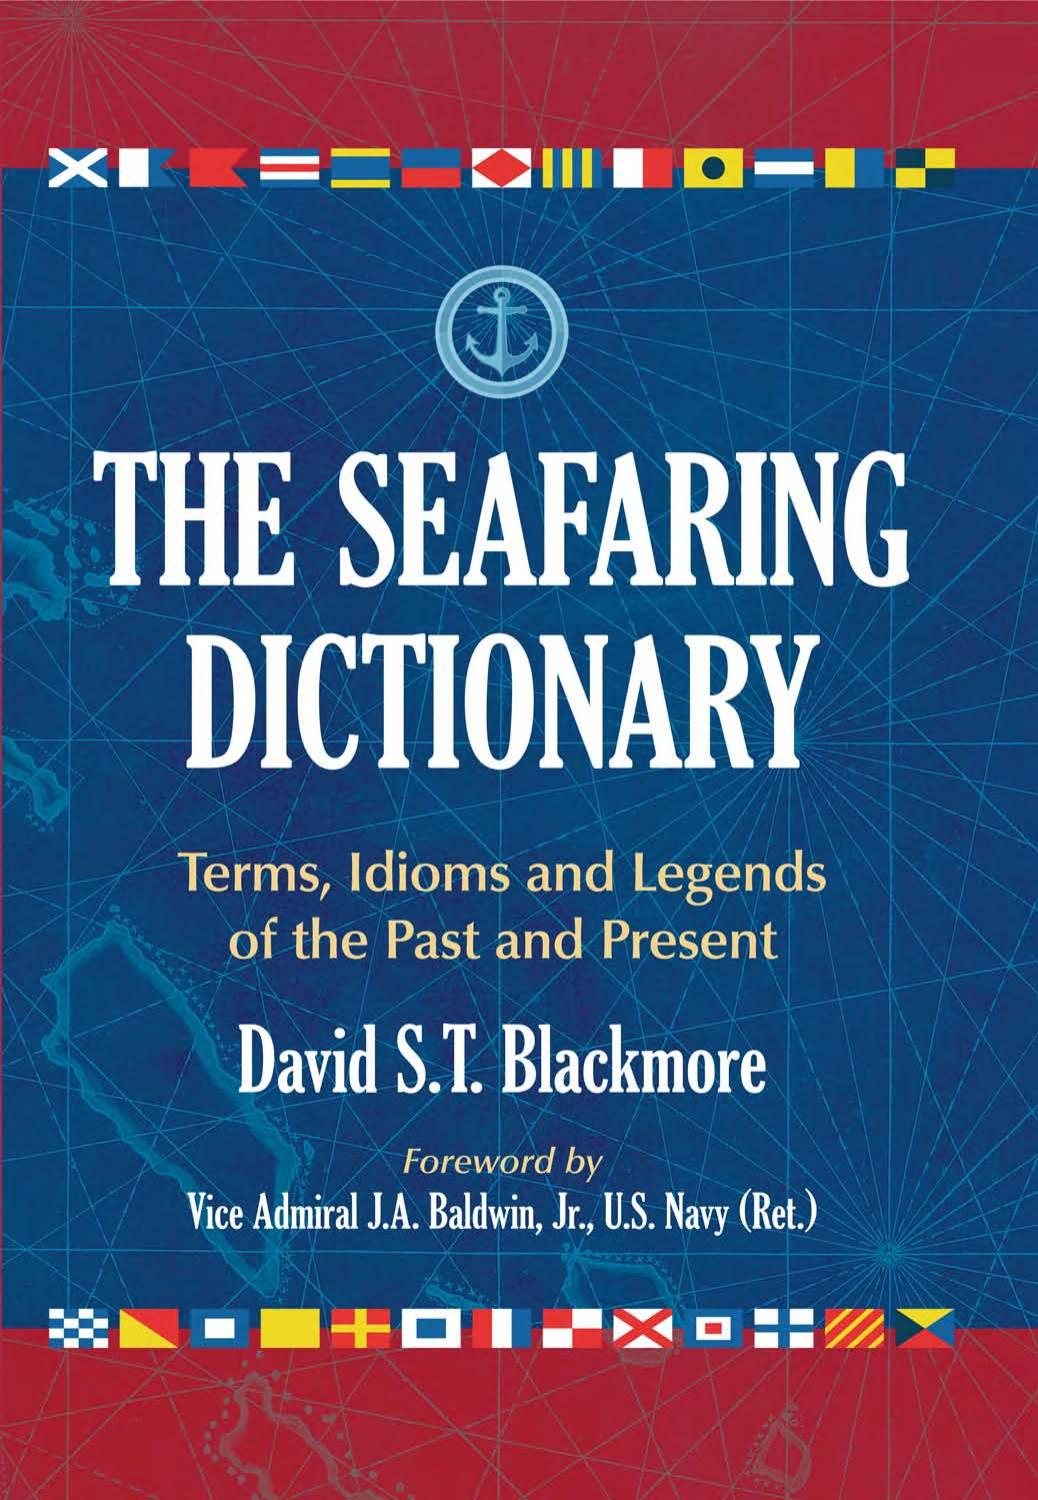 The Seafaring Dictionary: Terms, Idioms and Legends of the Past and Present